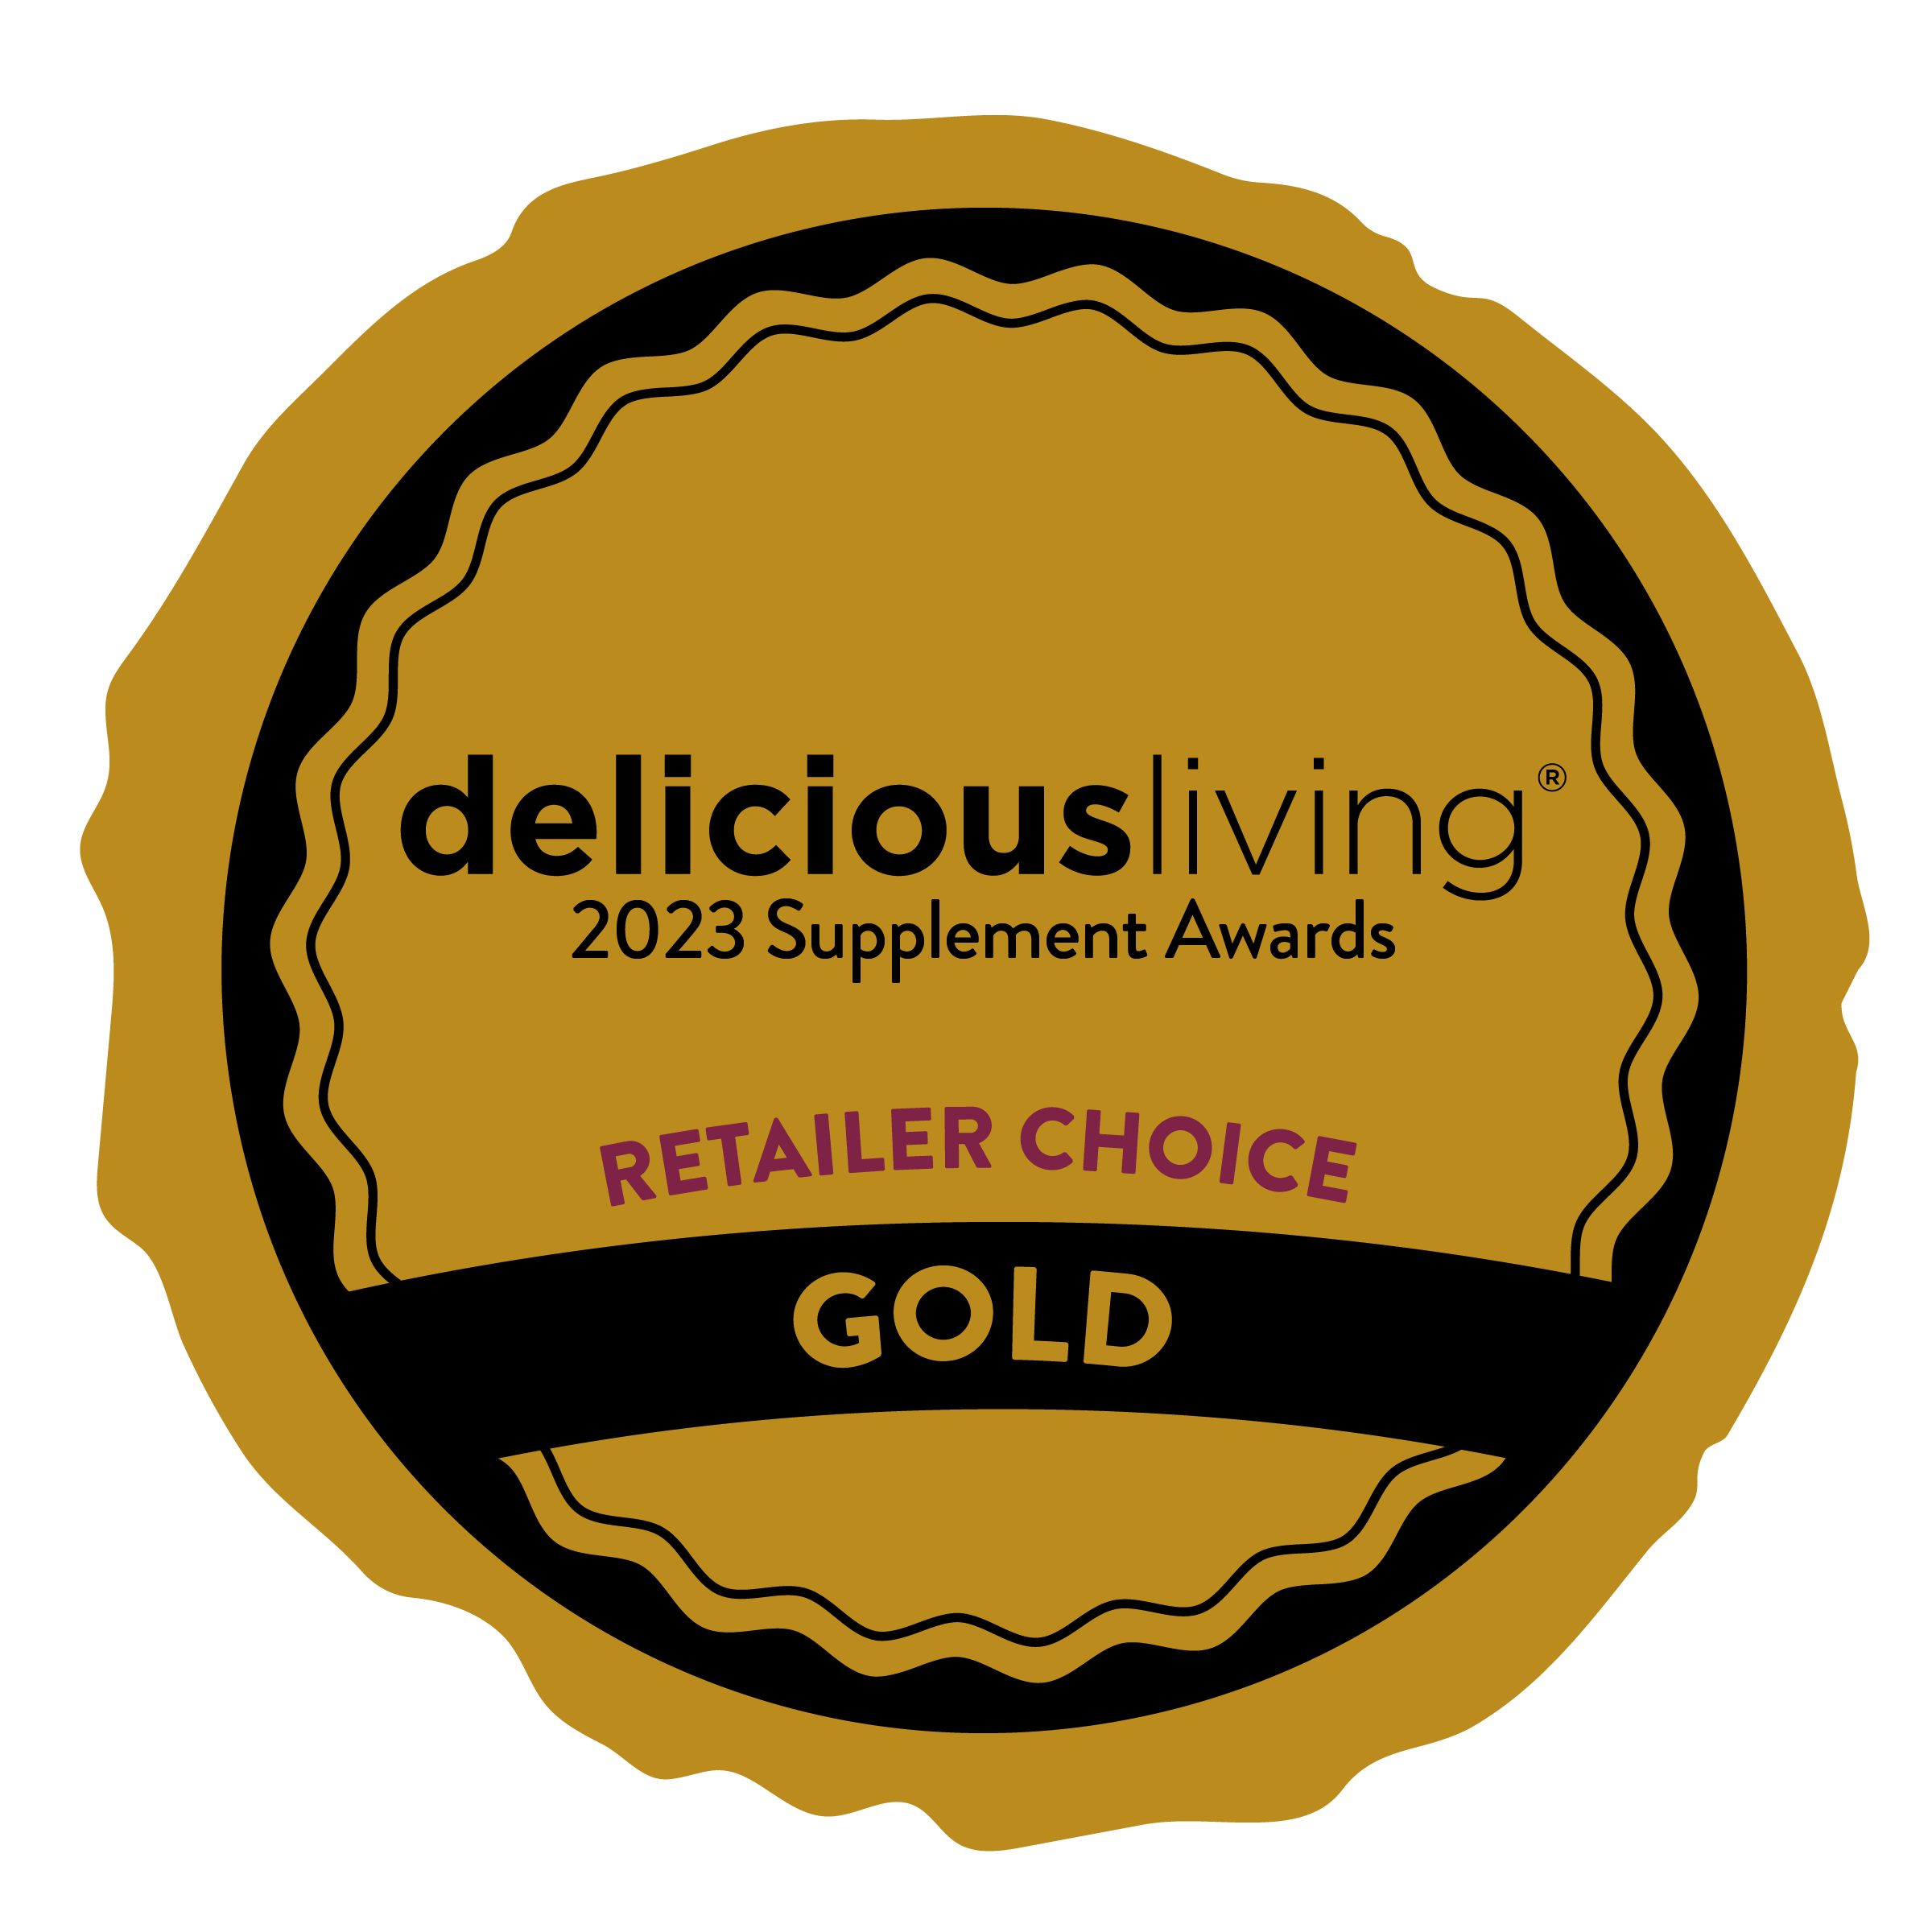 Joint Clinic Best Multivitamin Retailer Choice Award Winner Delicious Living Image